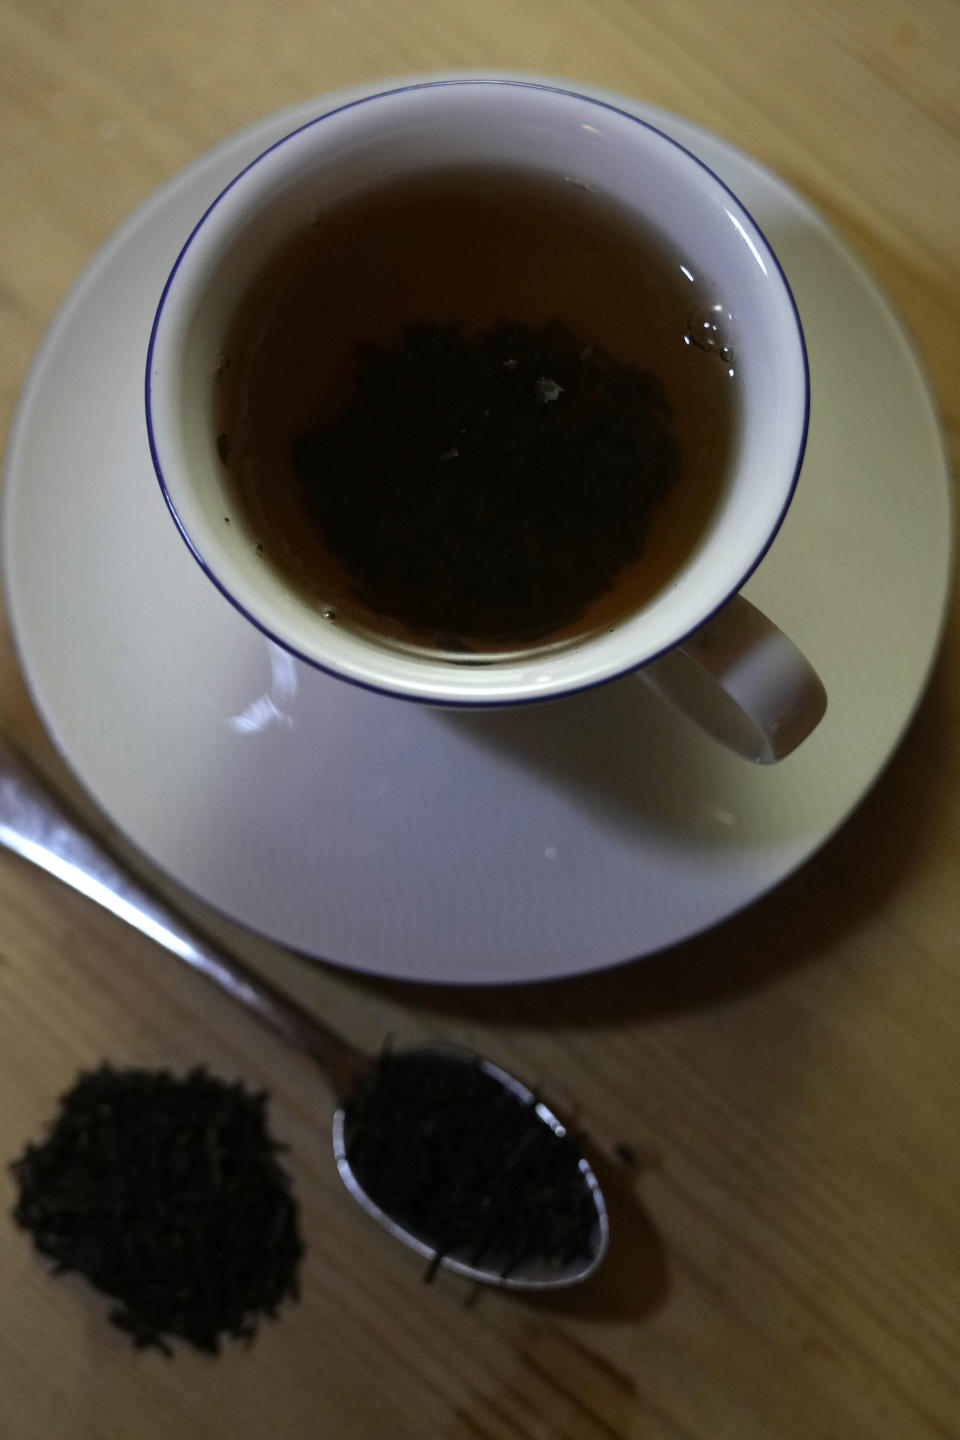 A cup of black tea with spoon and tea leaves is pictured in London, Monday, Aug. 29, 2022. Tea can be part of a healthy diet and tea drinkers may even be a little more likely to live longer than those who don't, according to a large study of British tea drinkers. Tea contains helpful substances known to reduce inflammation. Past studies in China and Japan, where green tea is popular, suggested health benefits. The new study extends the good news to the U.K.’s favorite drink: black tea. The study, published Monday, Aug. 29, 2022 in Annals of Internal Medicine, found the association held up for heart disease deaths, but there was no clear trend for cancer deaths. (AP Photo/Alastair Grant)